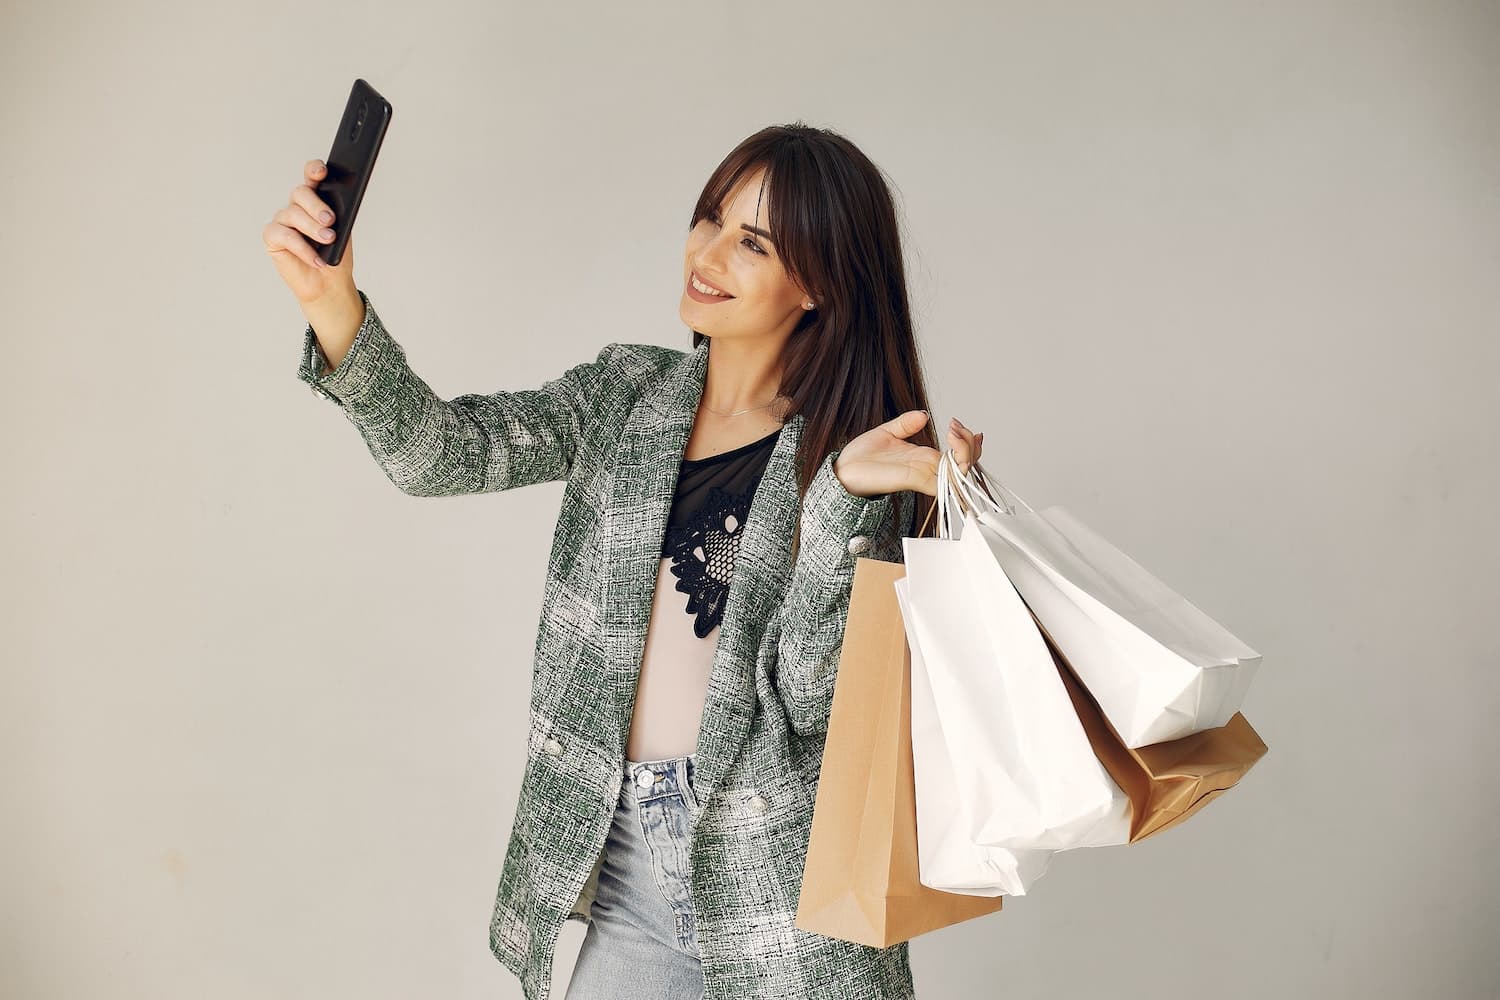 a woman taking a selfie to learn how to become a brand ambassador for clothing companies